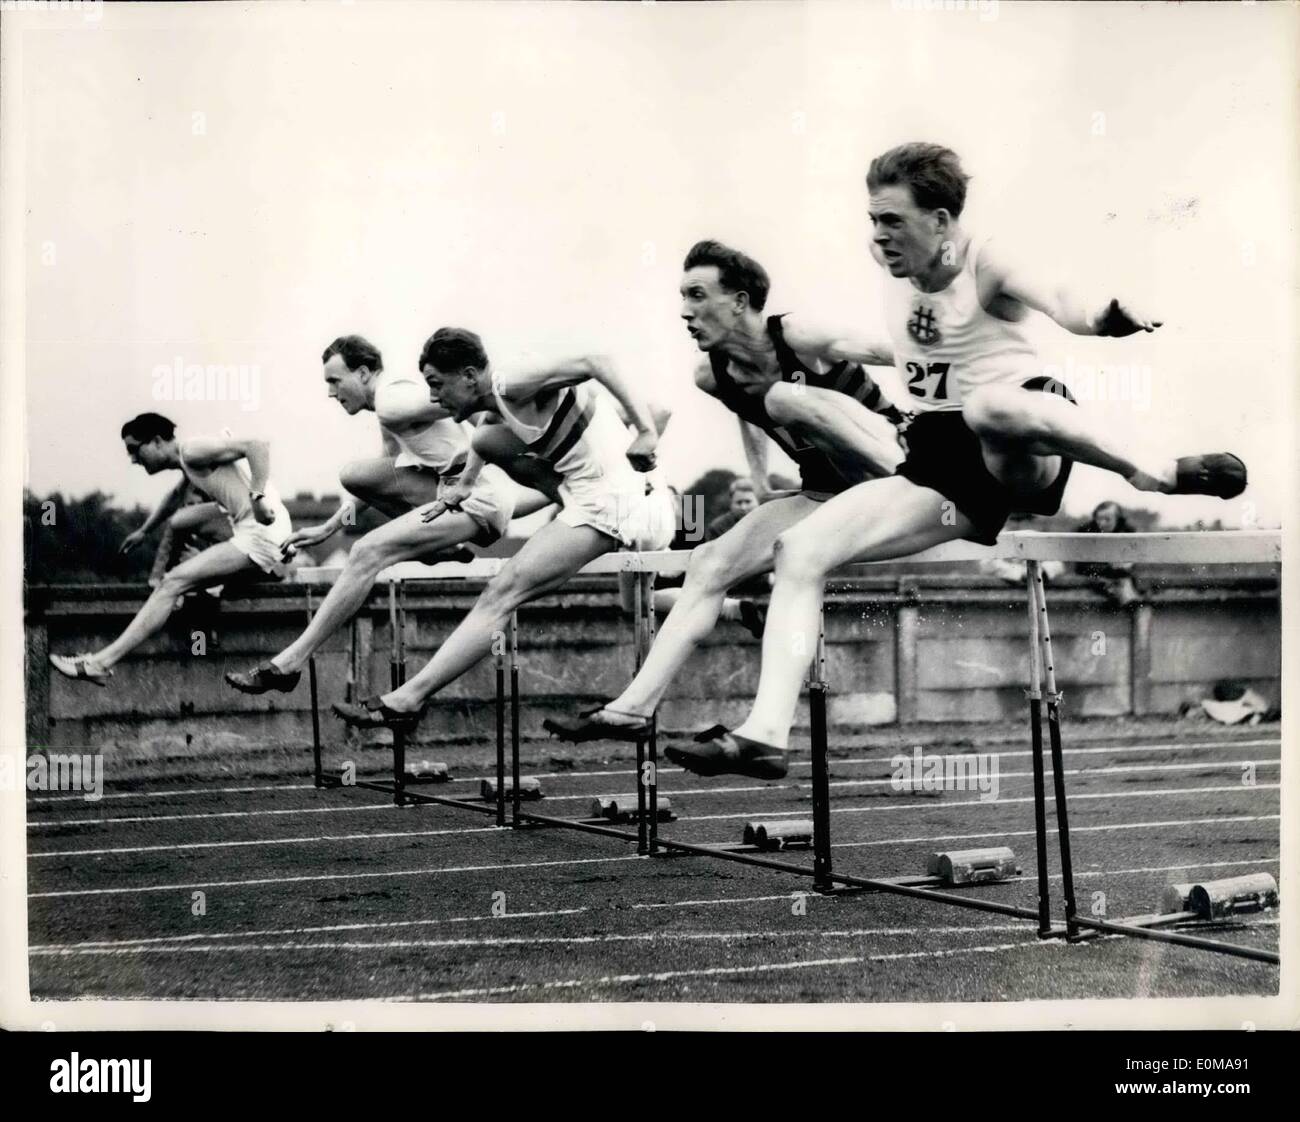 May 05, 1954 - Athletics at Chiswick.: The Athletic Meeting at Chiswick today consisted of the annual inter-club contest for the Sward Trophy organized by the Polytechnic Harriers, and some invitation races on the track. Photo shows taking the hurdle during Final of the 120 Yards Hurdles - Sward Trophy - are (L to R): P.B. Hildreth, the winner; J Bentley, P.A.I. Vine(3rd) and F.J. Parker. Stock Photo